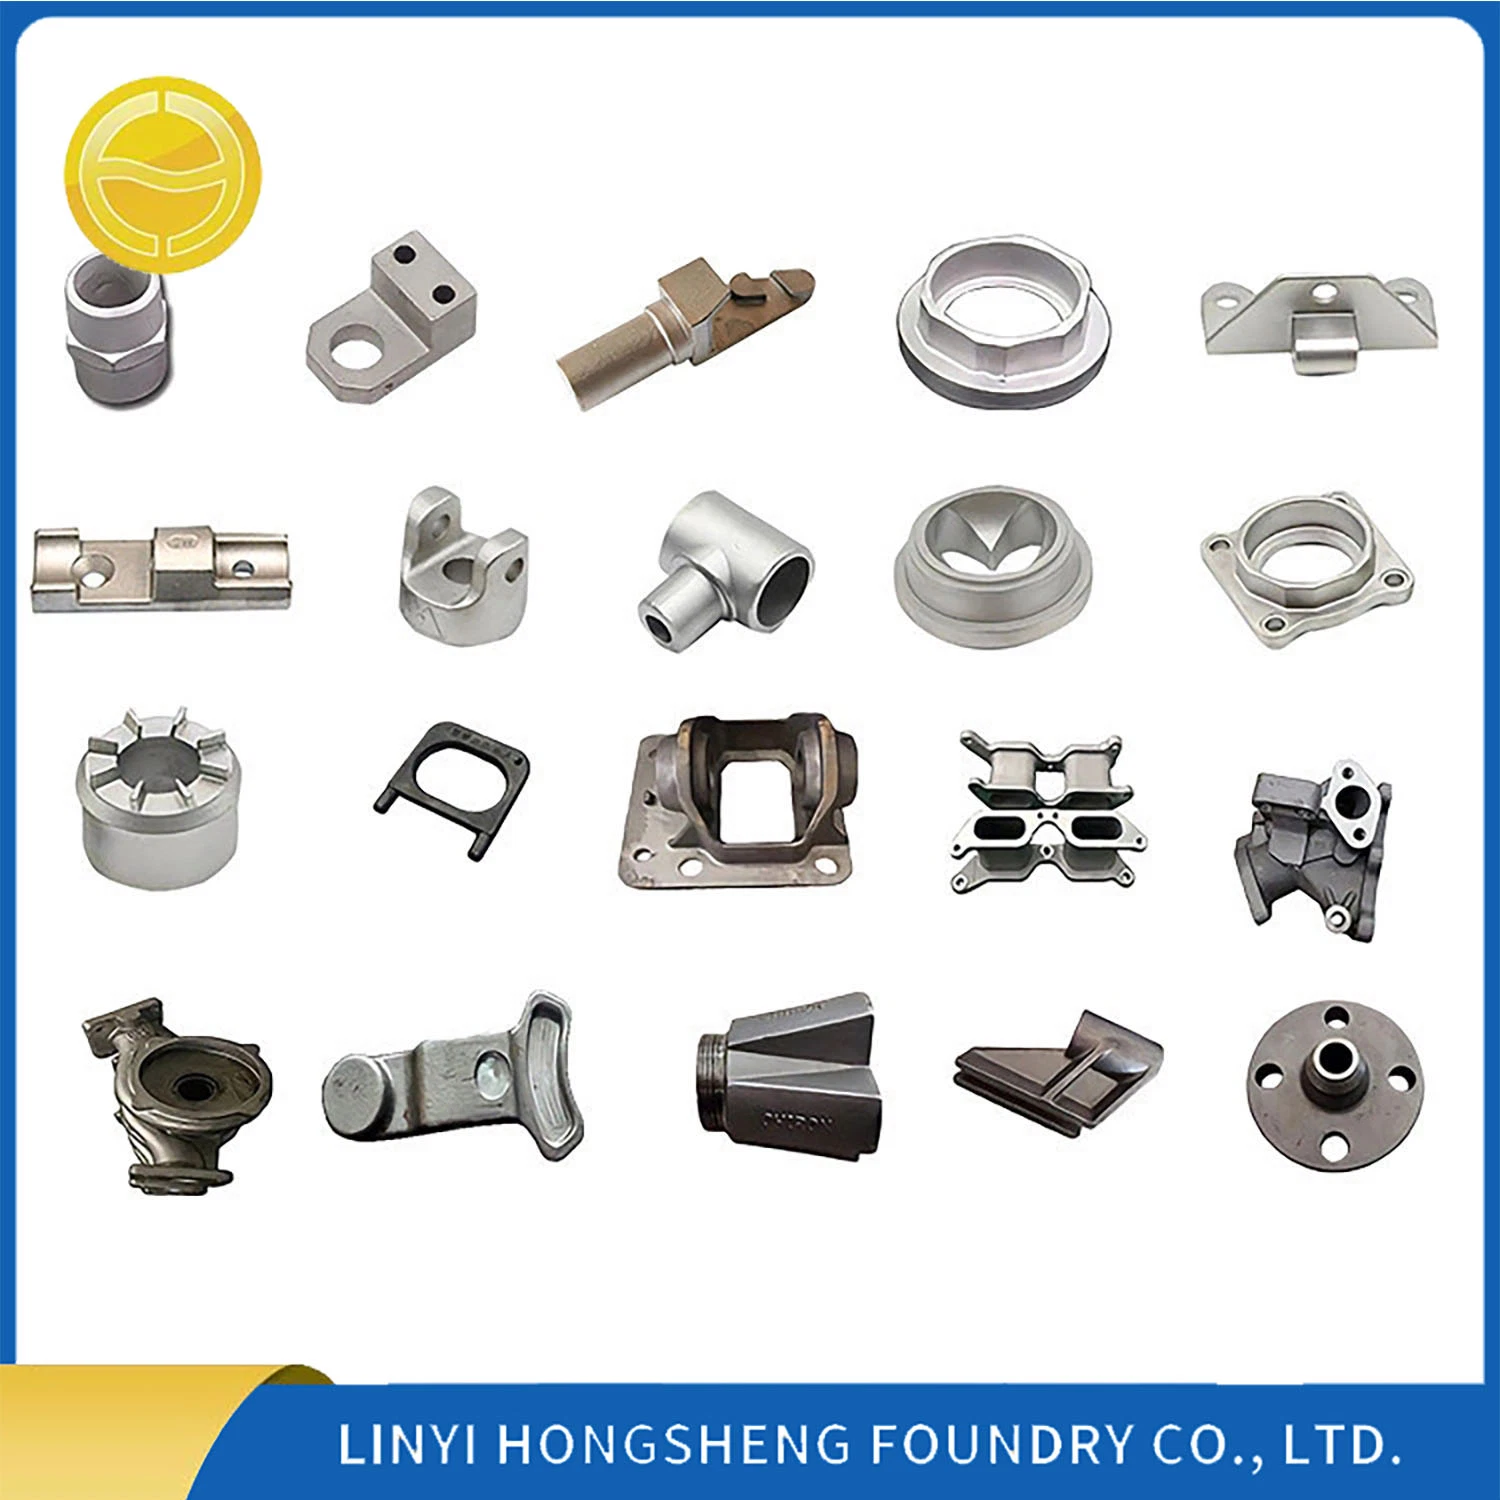 OEM Stainless Steel Pipe/Valve/Connector/Hardware Auto Parts/Agriculture Parts/Medical Equipment Parts/Lost Wax Investment Casting/CNC Machining Casting